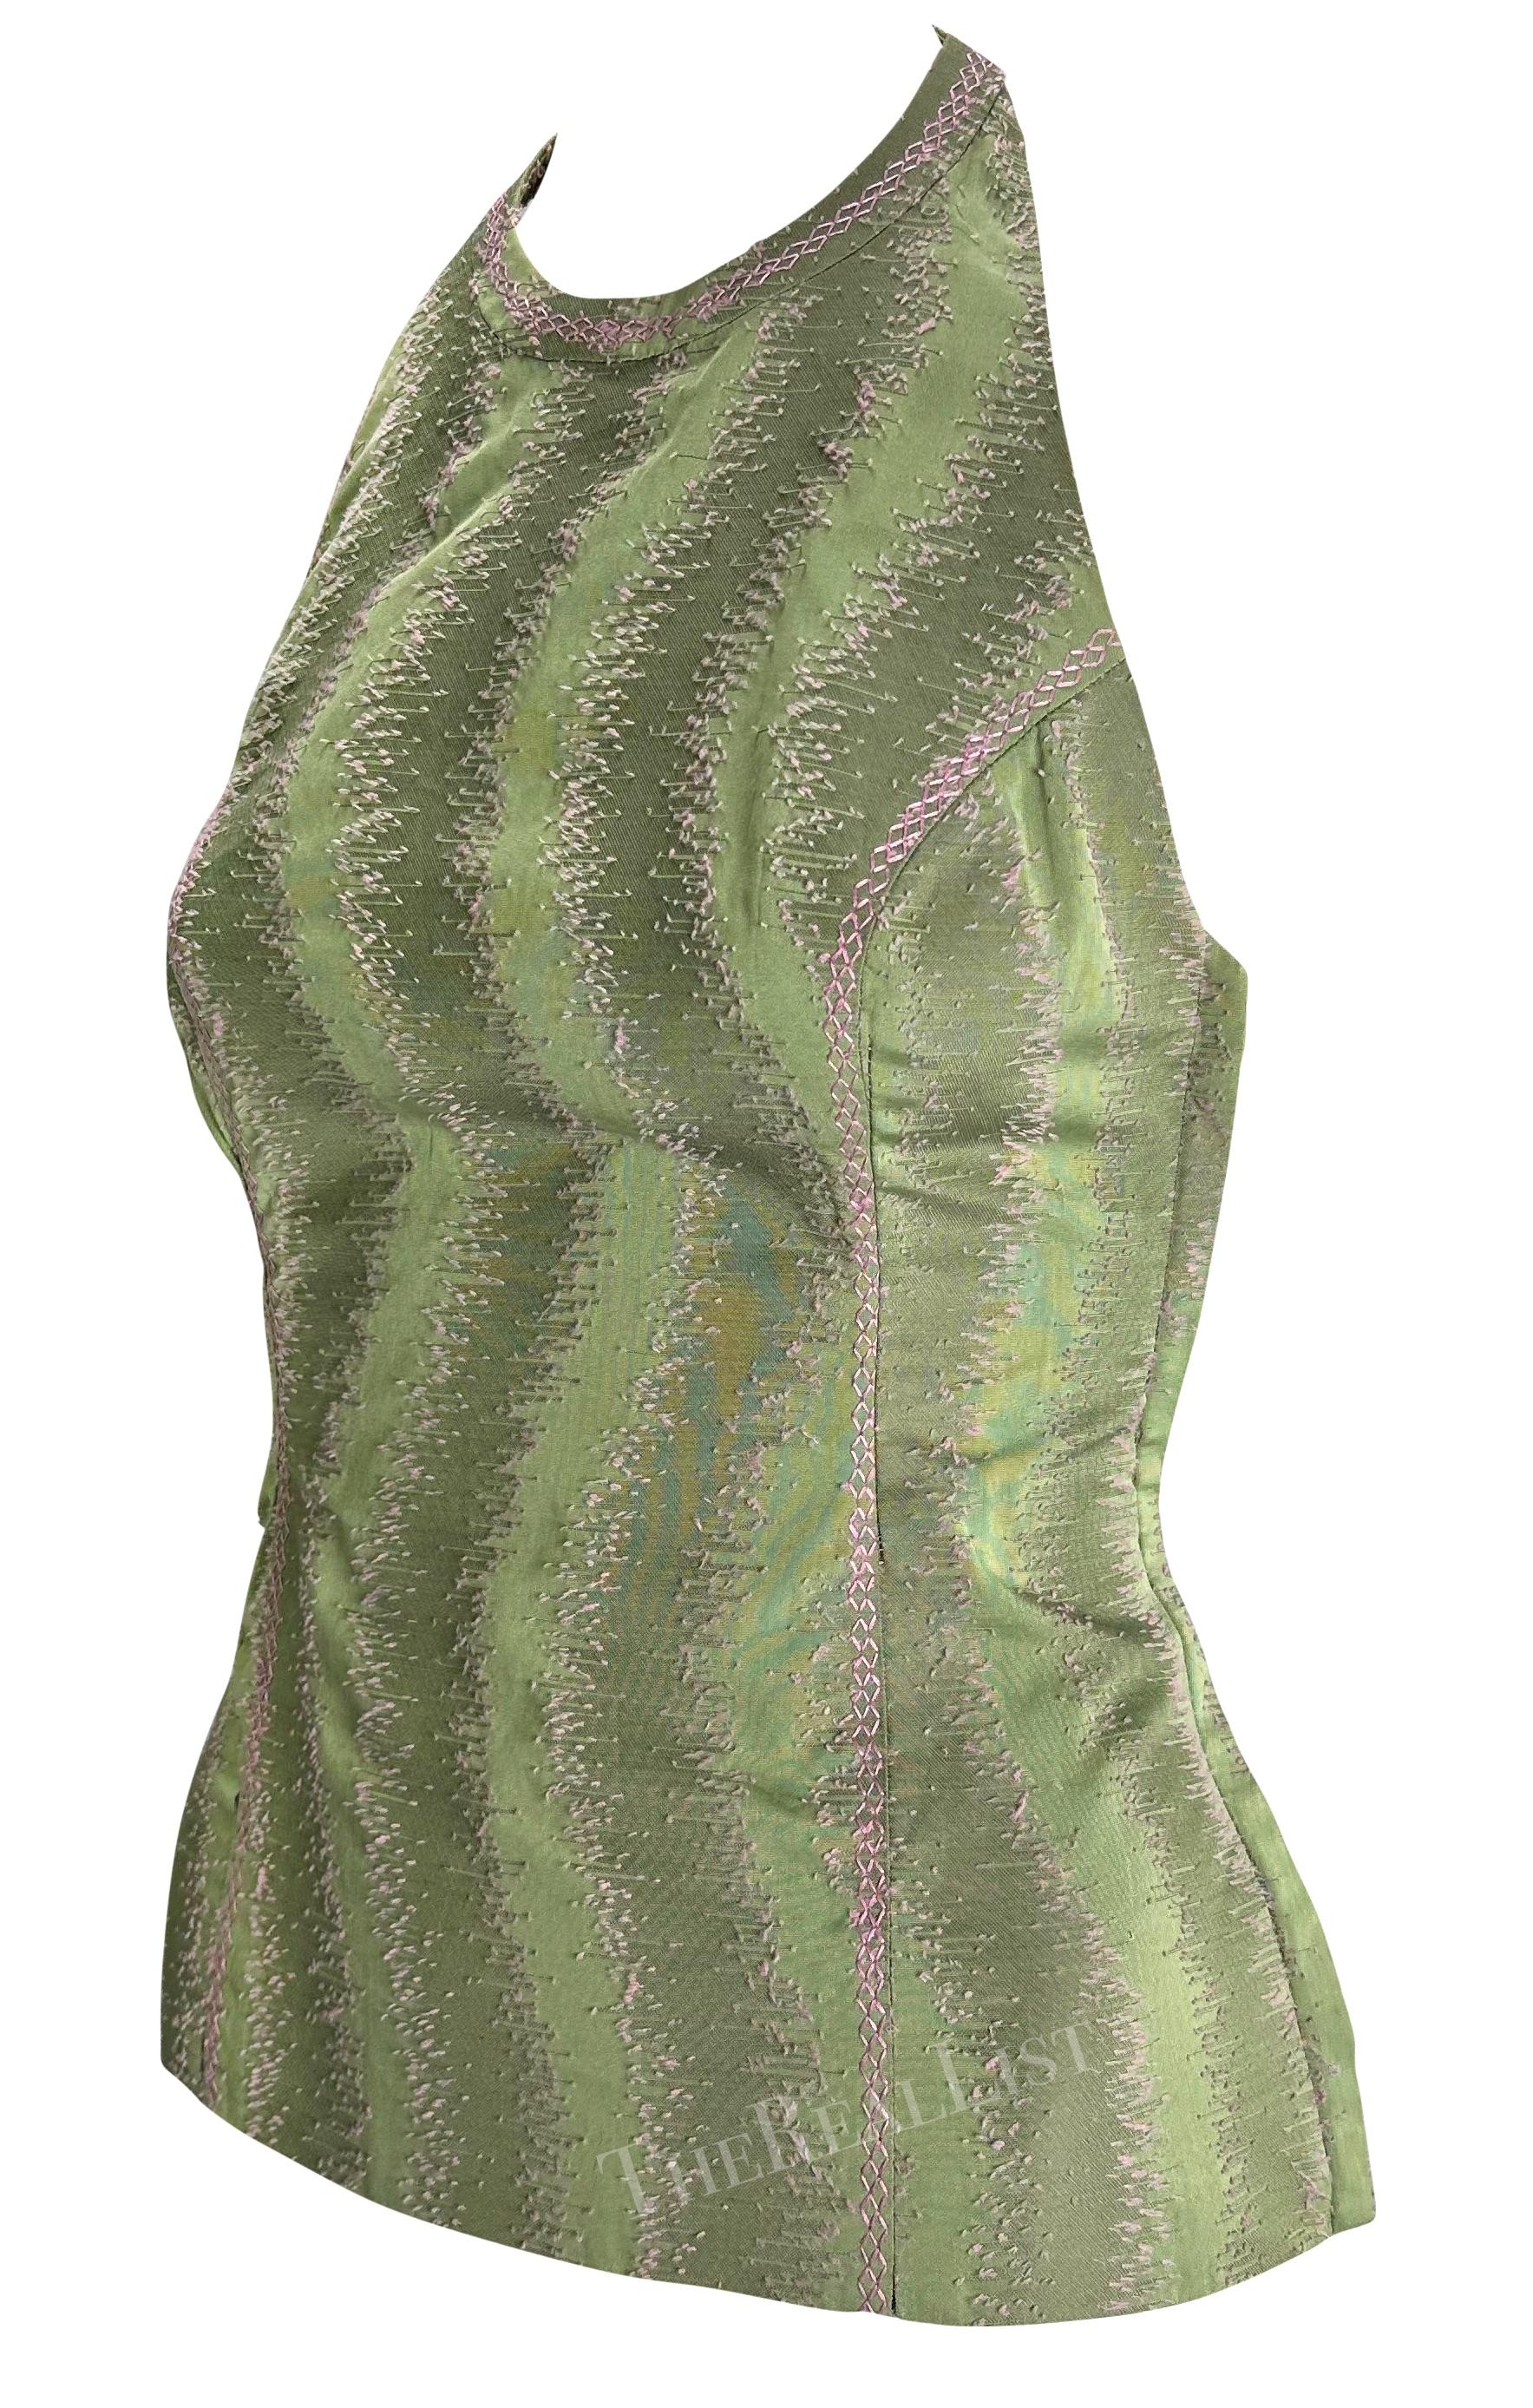 Presenting a beautiful pistachio-colored Gianni Versace halter neck top, designed by Donatella Versace. From 1999, this top features a light pink abstract pattern throughout created with intricate embroidery. This gives the piece textural depth